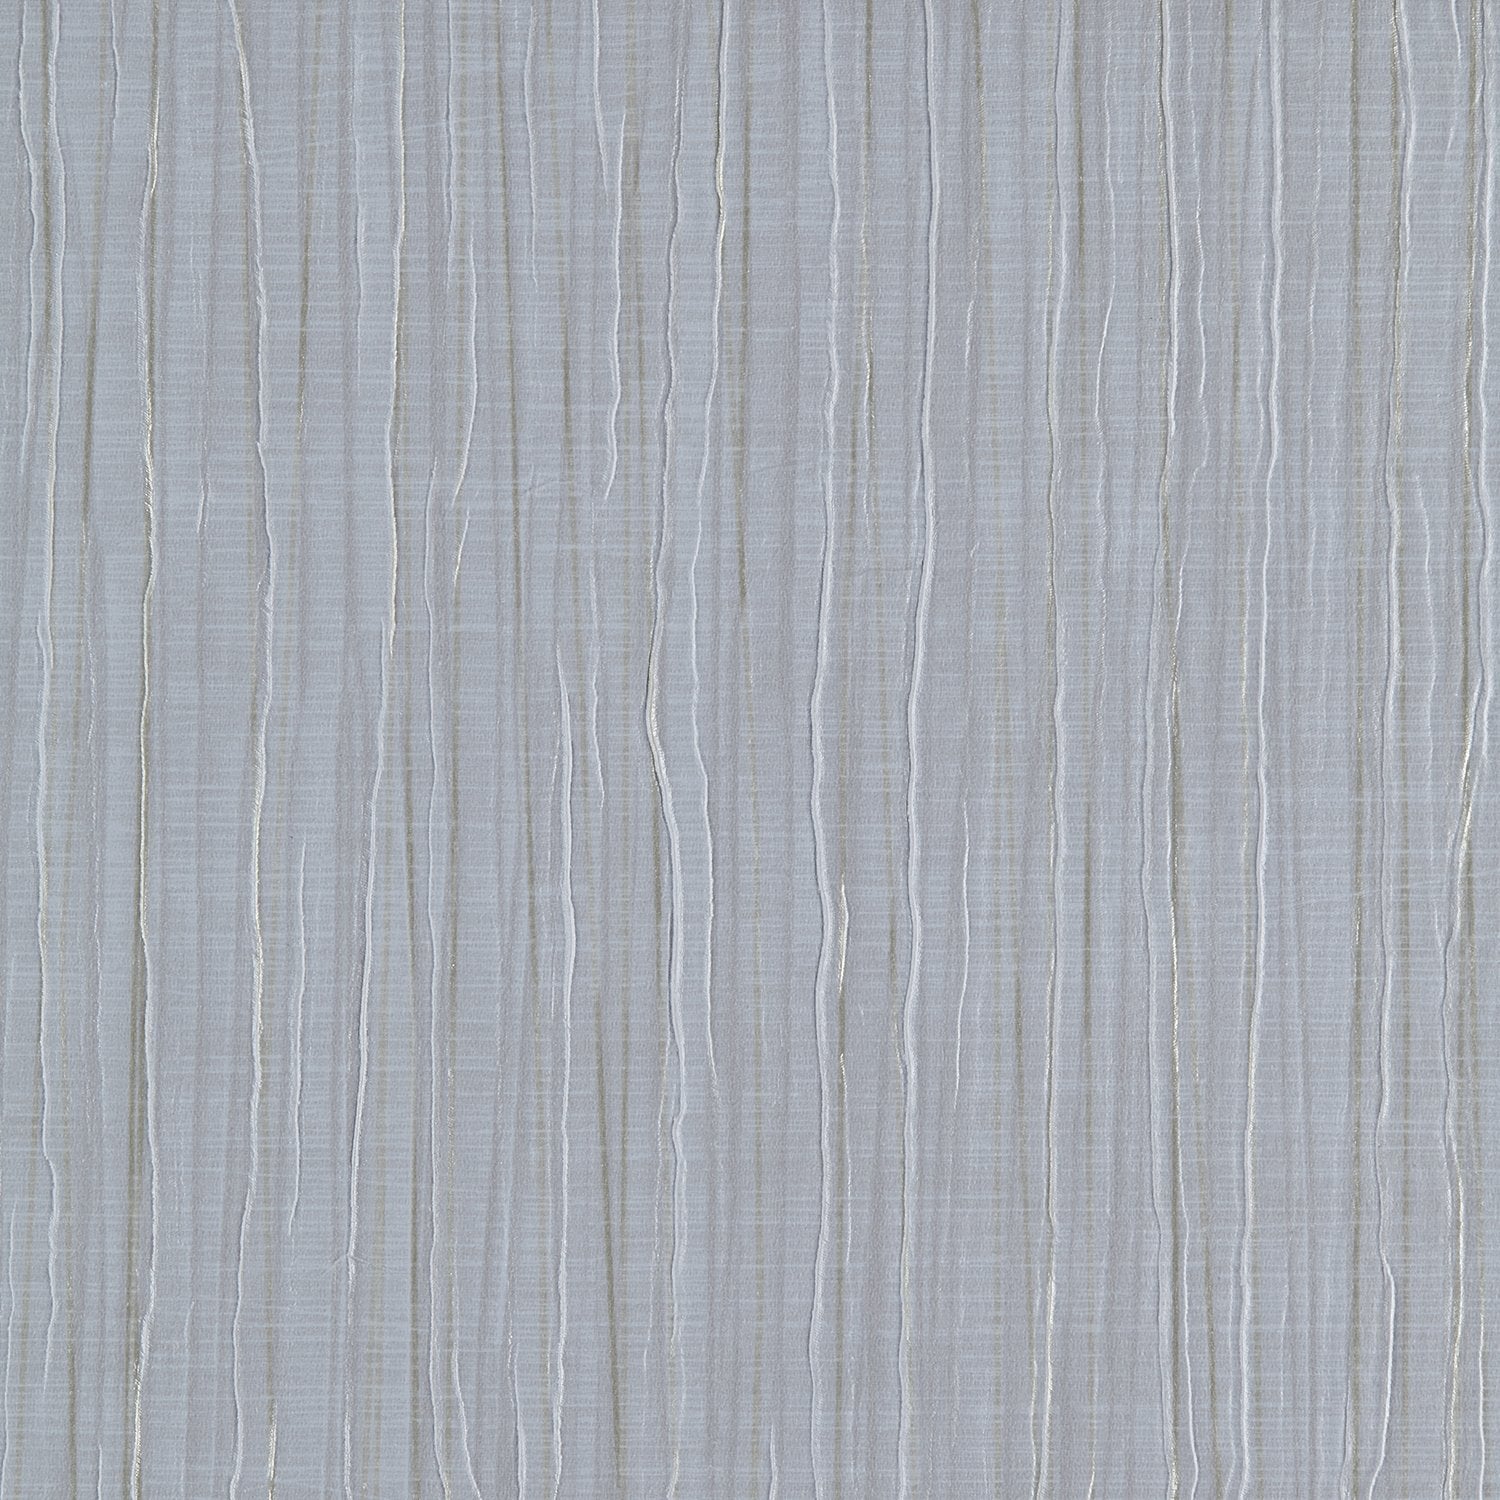 Vogue Pleat - Y47011 - Wallcovering - Vycon - Kube Contract